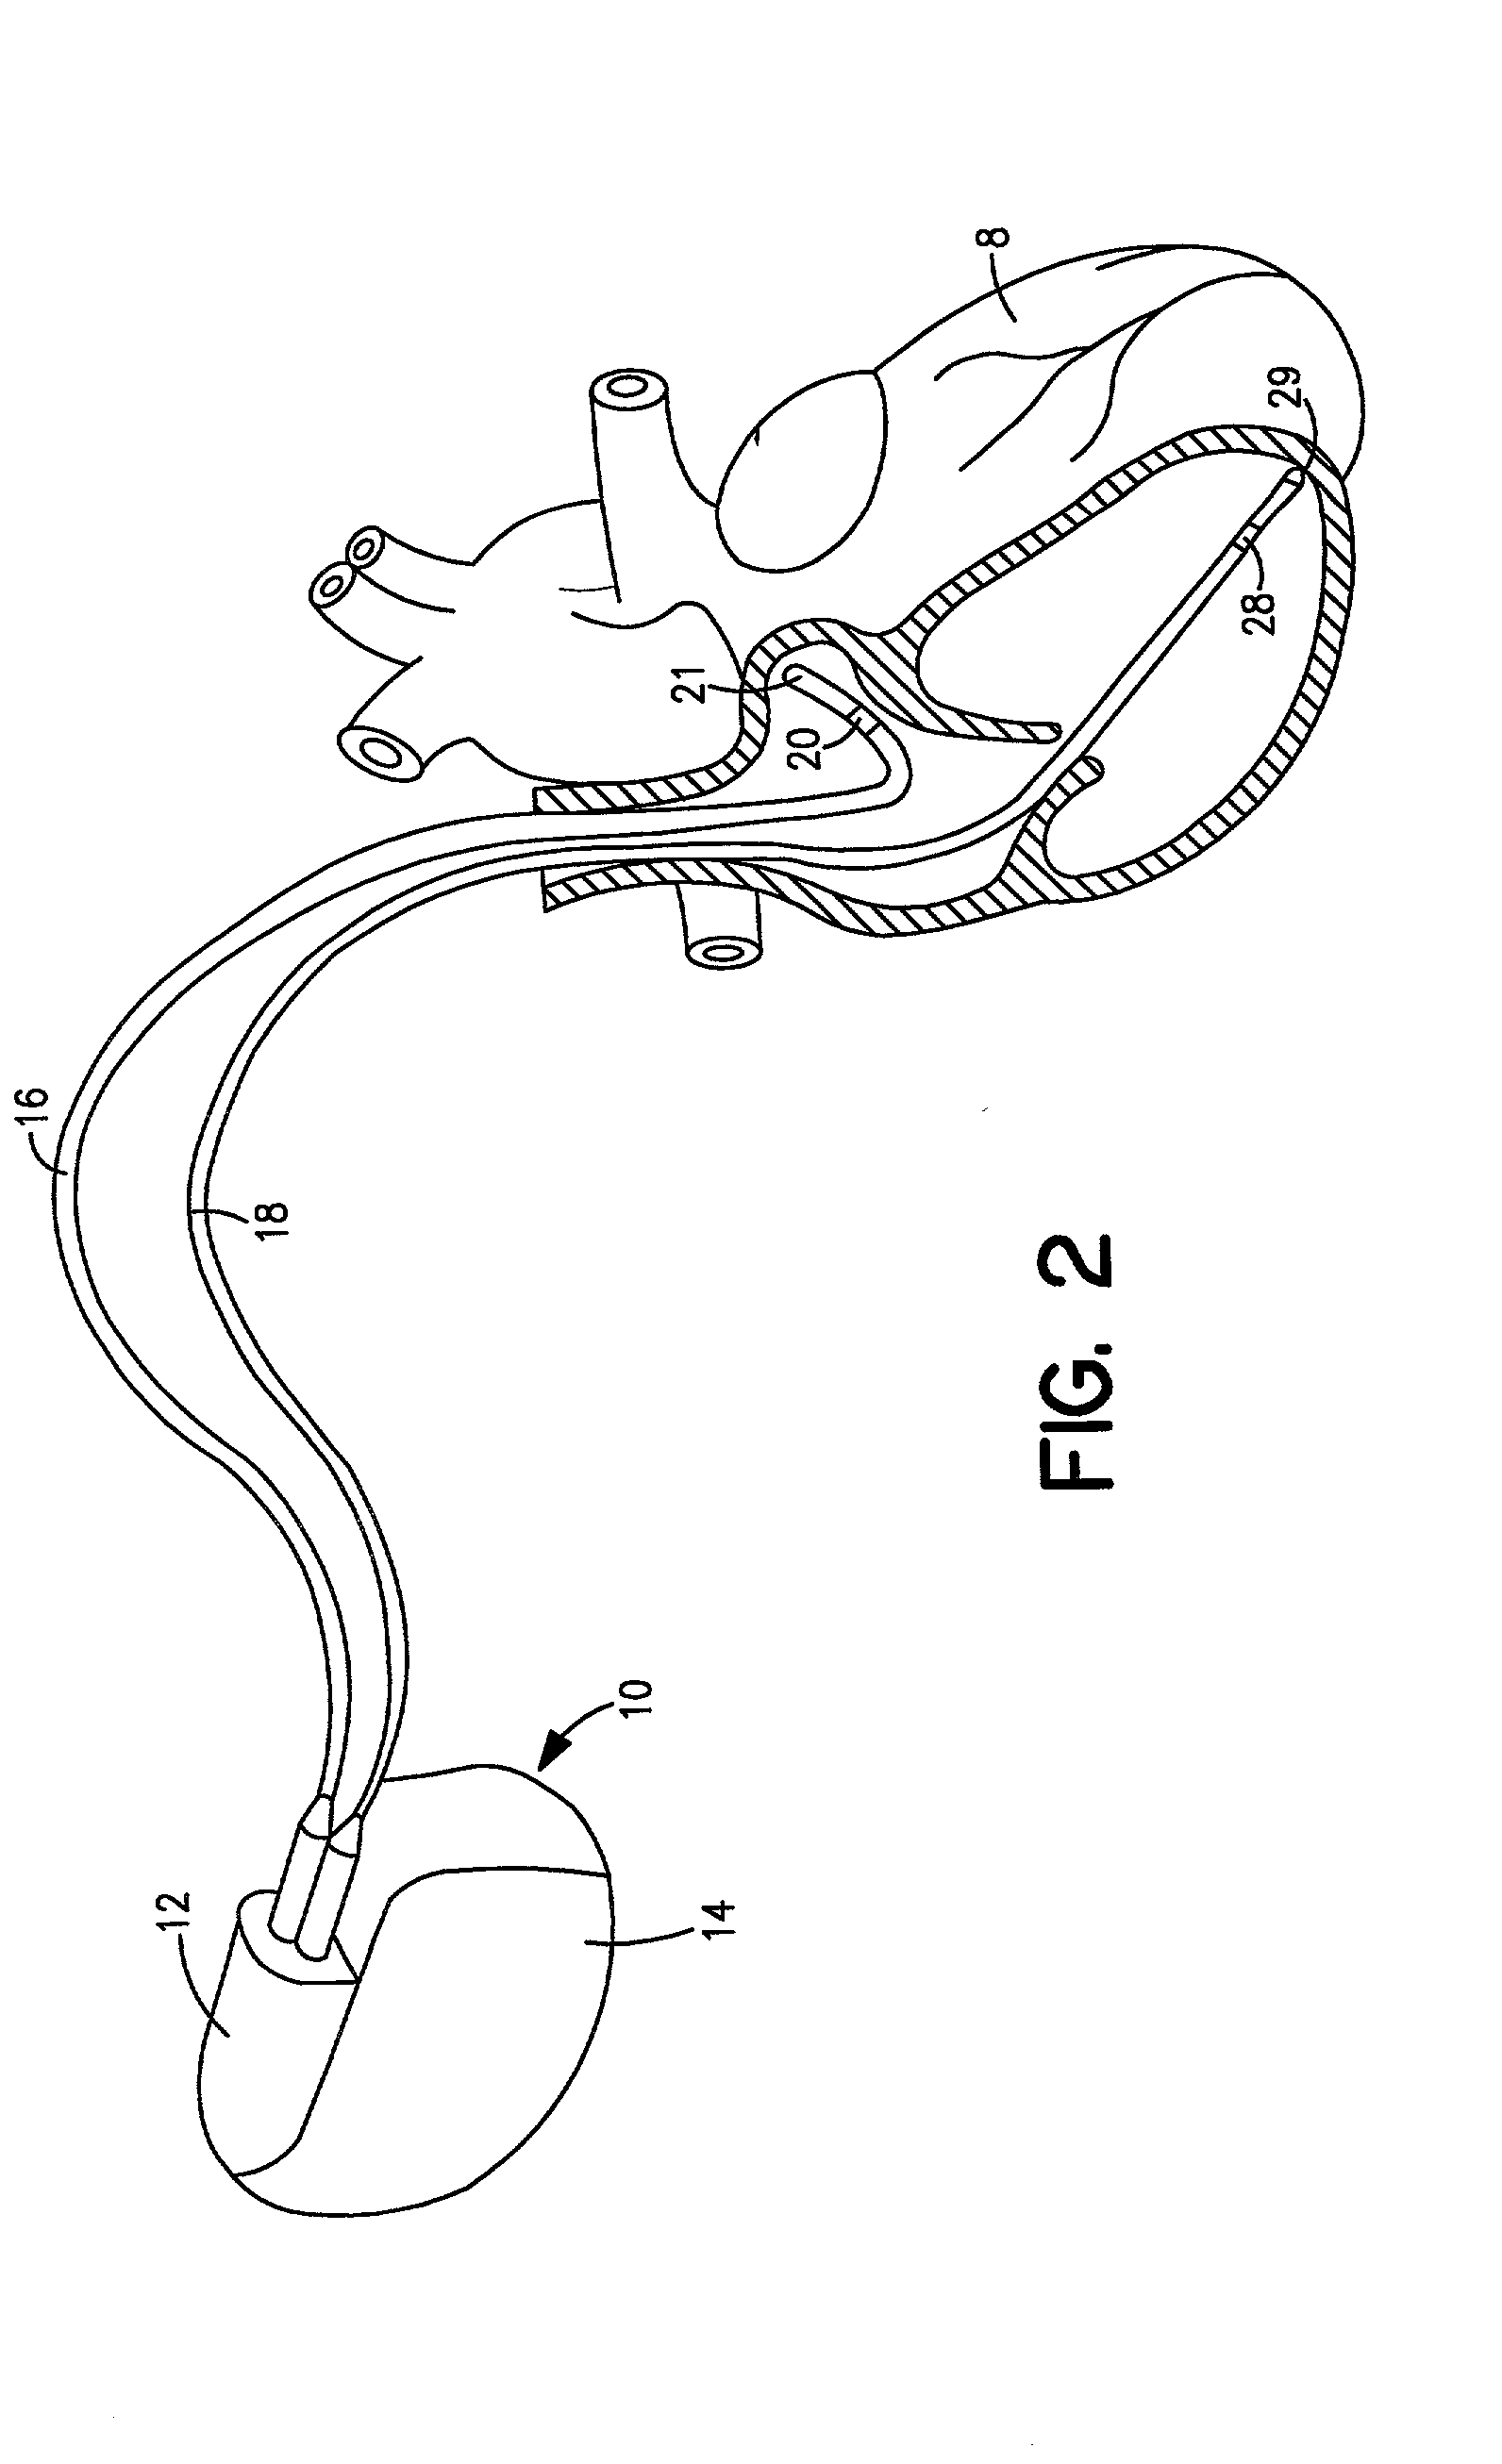 Method and system for atrial capture detection based on far-field R-wave sensing